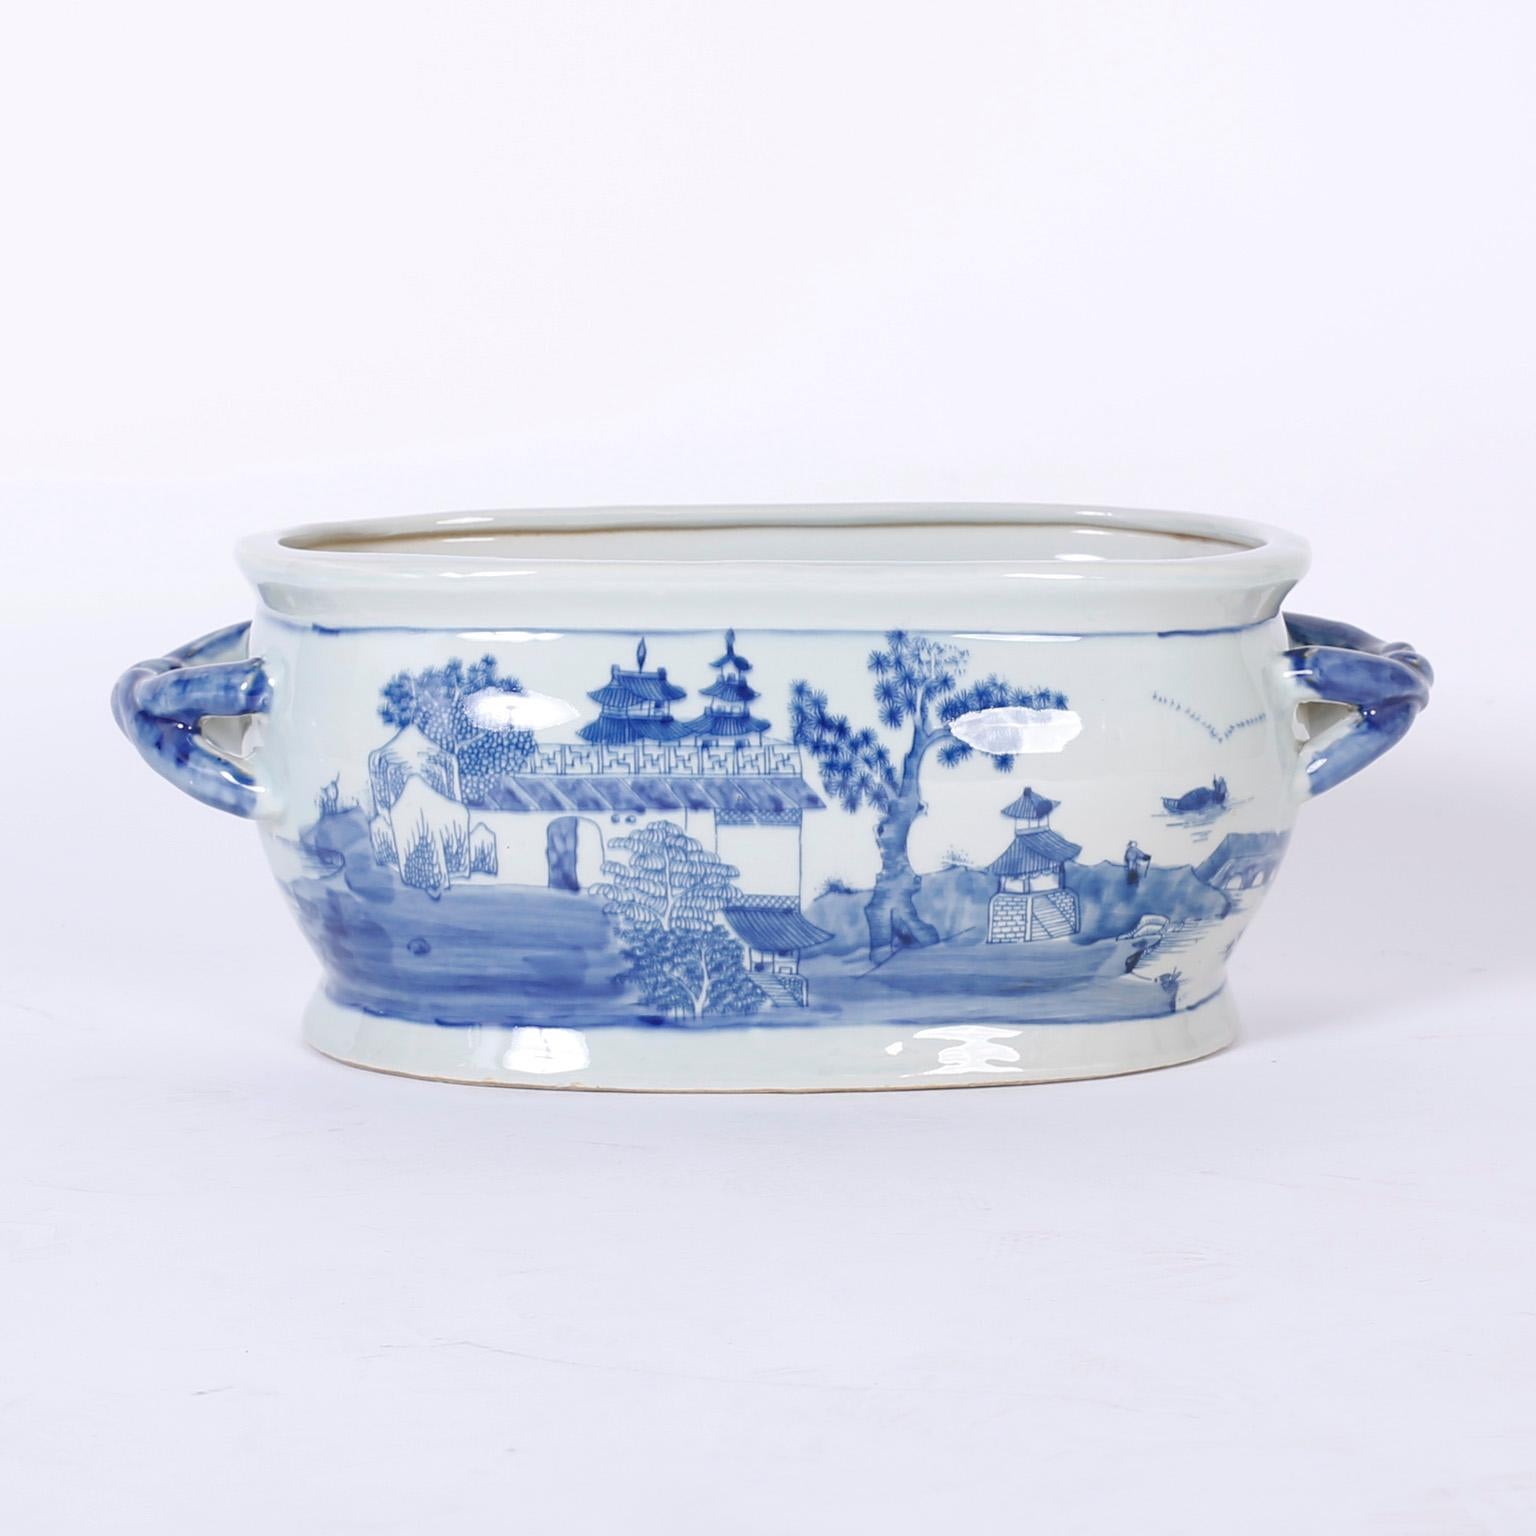 Lofty pair of Chinese blue and white Chinese export style porcelain pots hand decorated on both sides with symbolic chinoiserie landscapes and having unique twisted handles. Perfect for orchid arrangements.